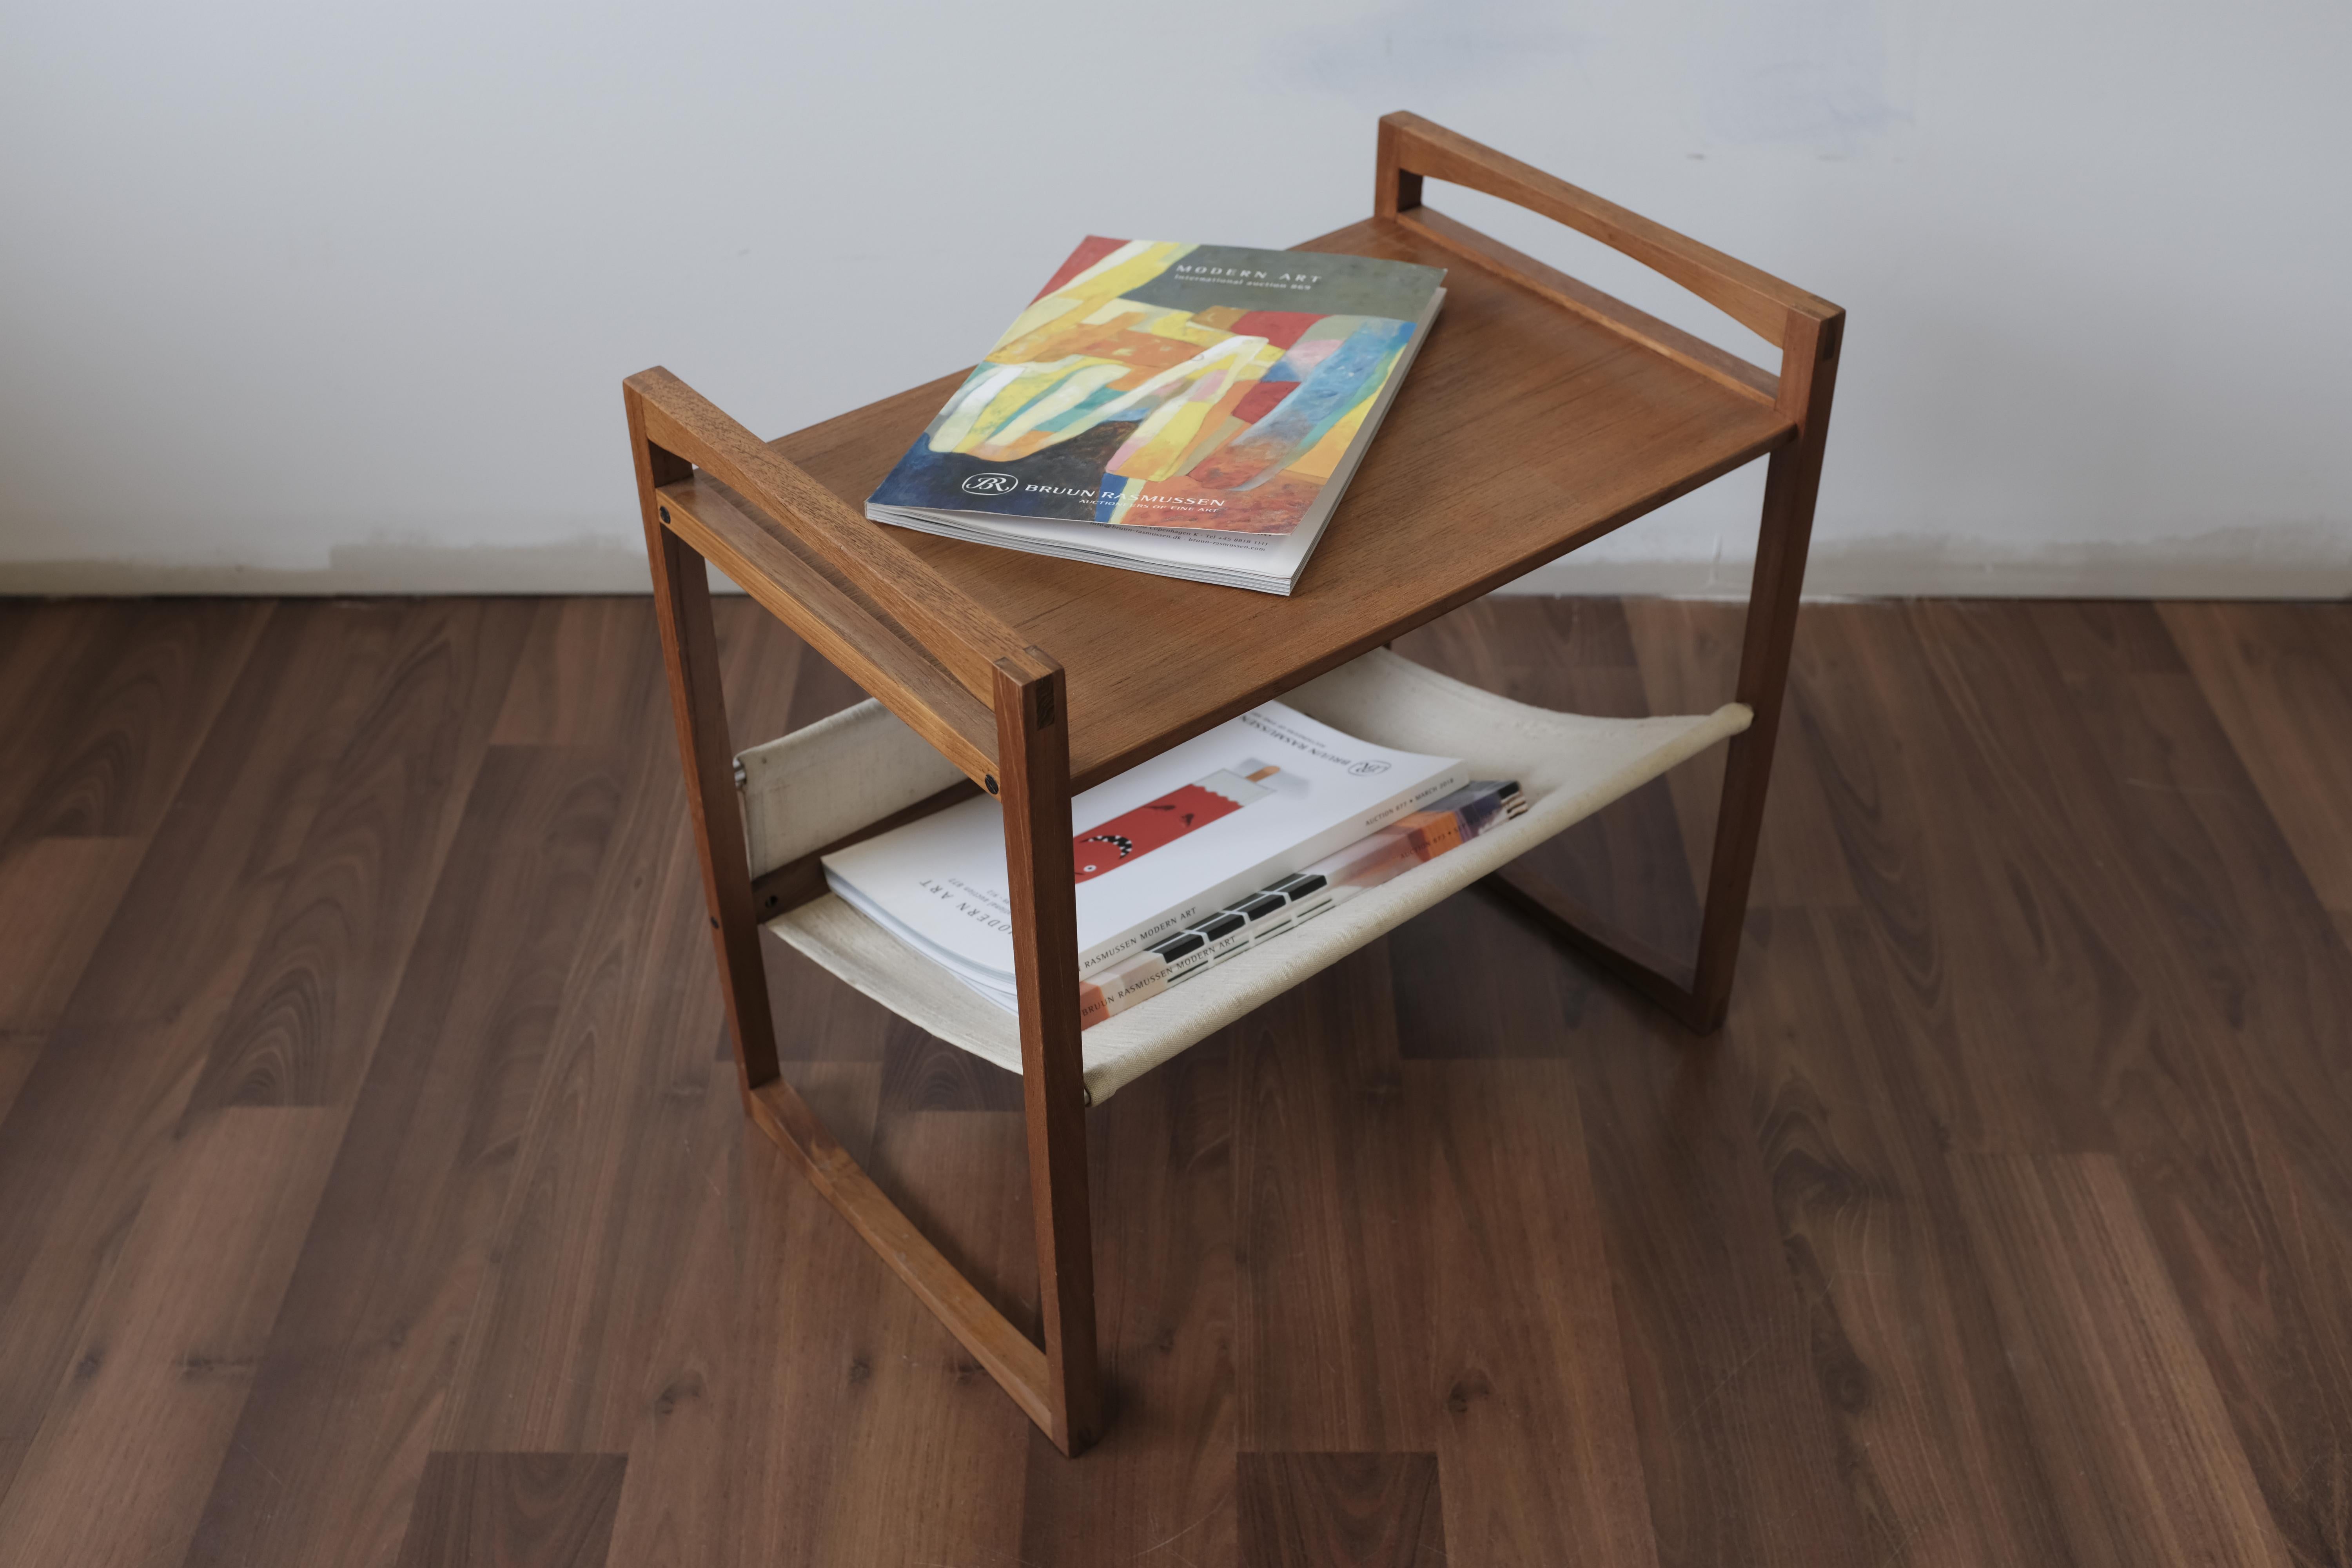 Small teak table with an angled linen rack for magazines, designed by Kai Kristiansen and manufactured by Sika Møbler. Bridal-jointed solid teak end frames are joined to the table top and stretcher using bolts. The linen rack can be positioned to